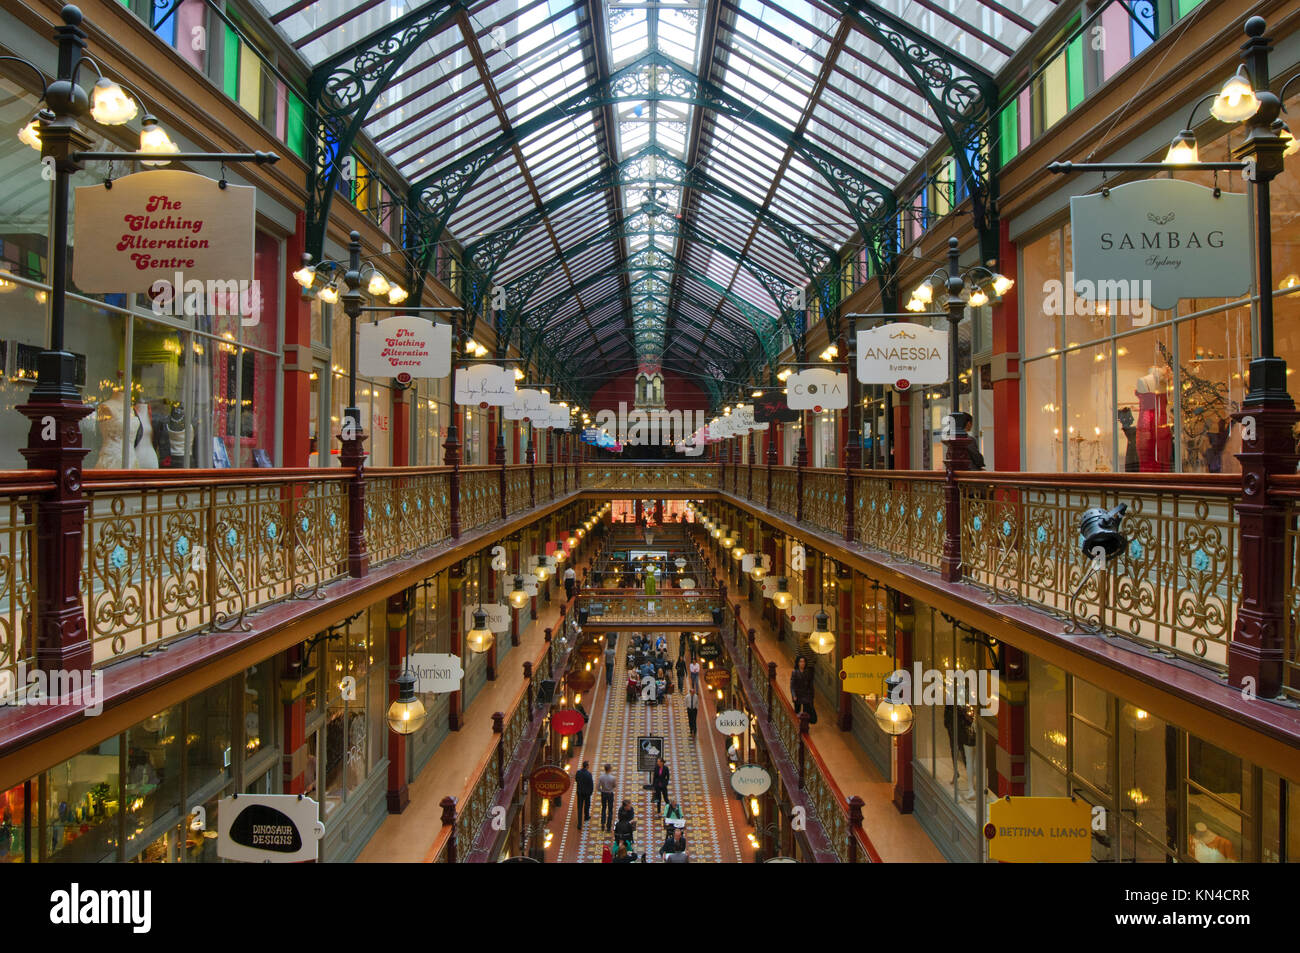 Interior of The Strand Arcade, Sydney, New South Wales (NSW), Australia. The Strand Arcade is a Victorian-style historic shopping arcade in Sydney. Stock Photo